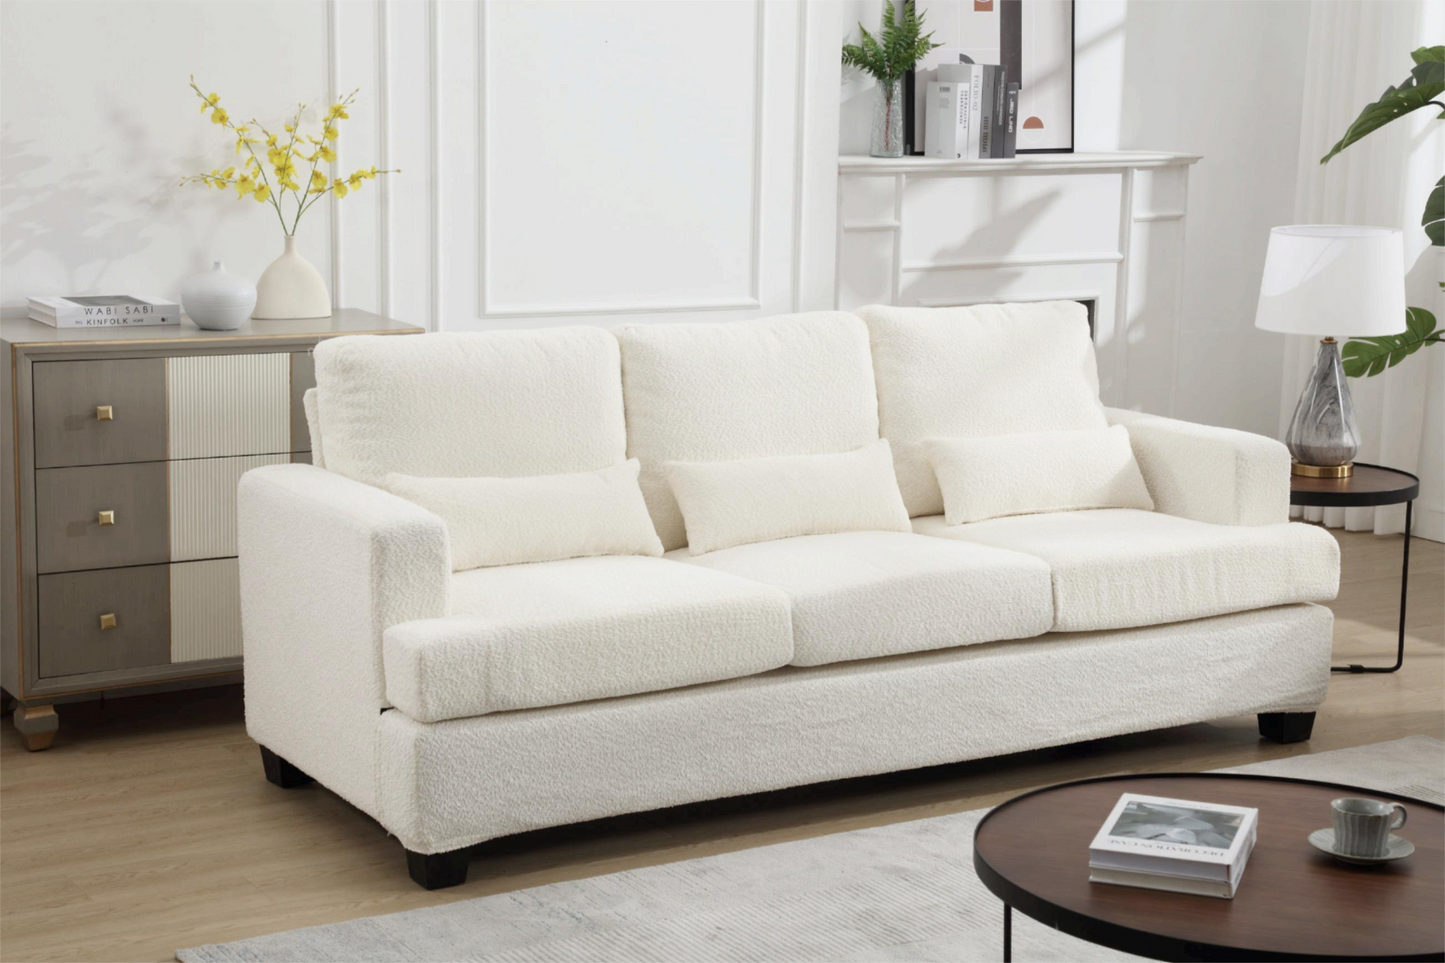 88.4" Length Modern Sofas Couches for Living Room, Sofas & couches with Square Armrest, Removable back Cushion and 3pcs waist pillow  (White&Gray Fabric), Goodies N Stuff